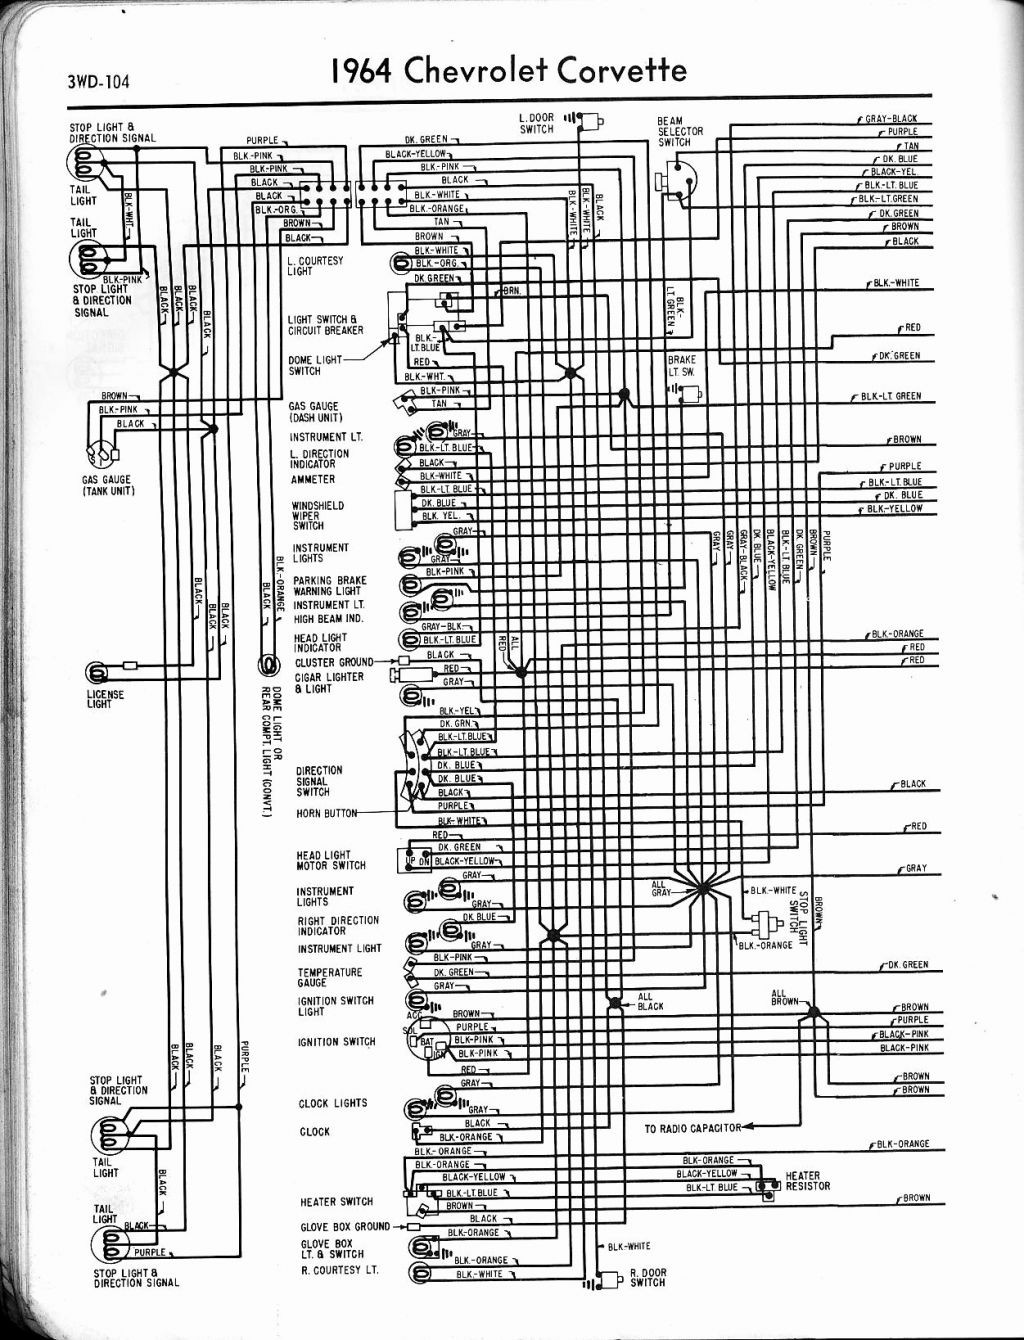 Taylor Dunn Wiring Diagram Awesome Nice Taylor Dunn Wiring Diagram Ideas Best For Wiring